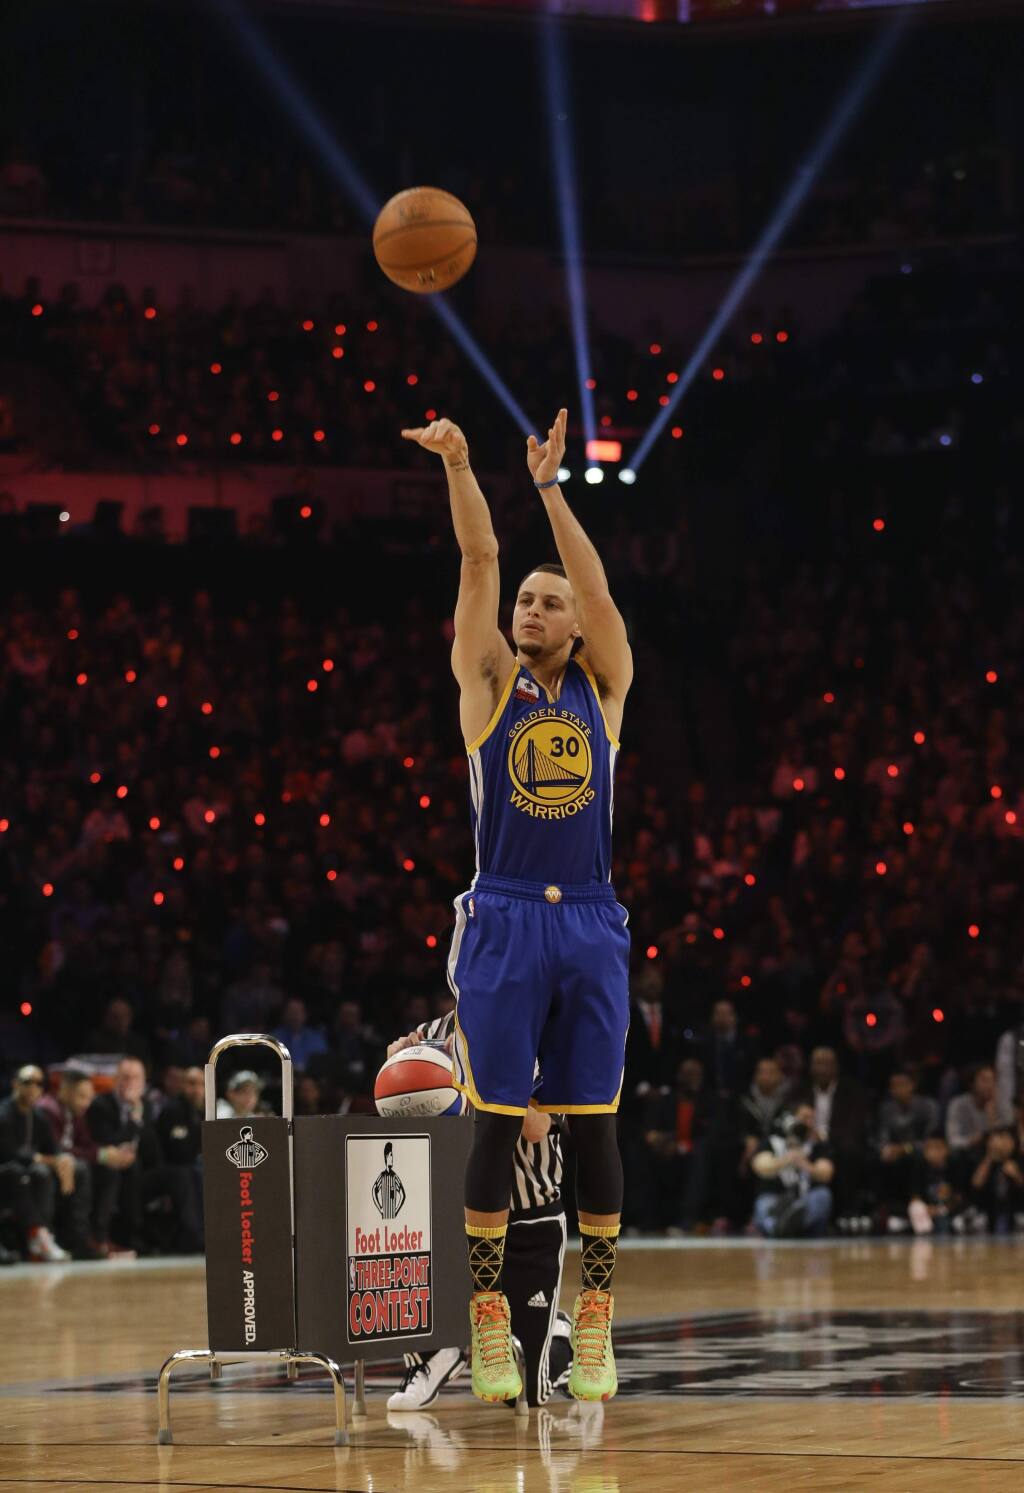 All-Star weekend: Team selections, dunk contest, three-point contestants  and how to watch